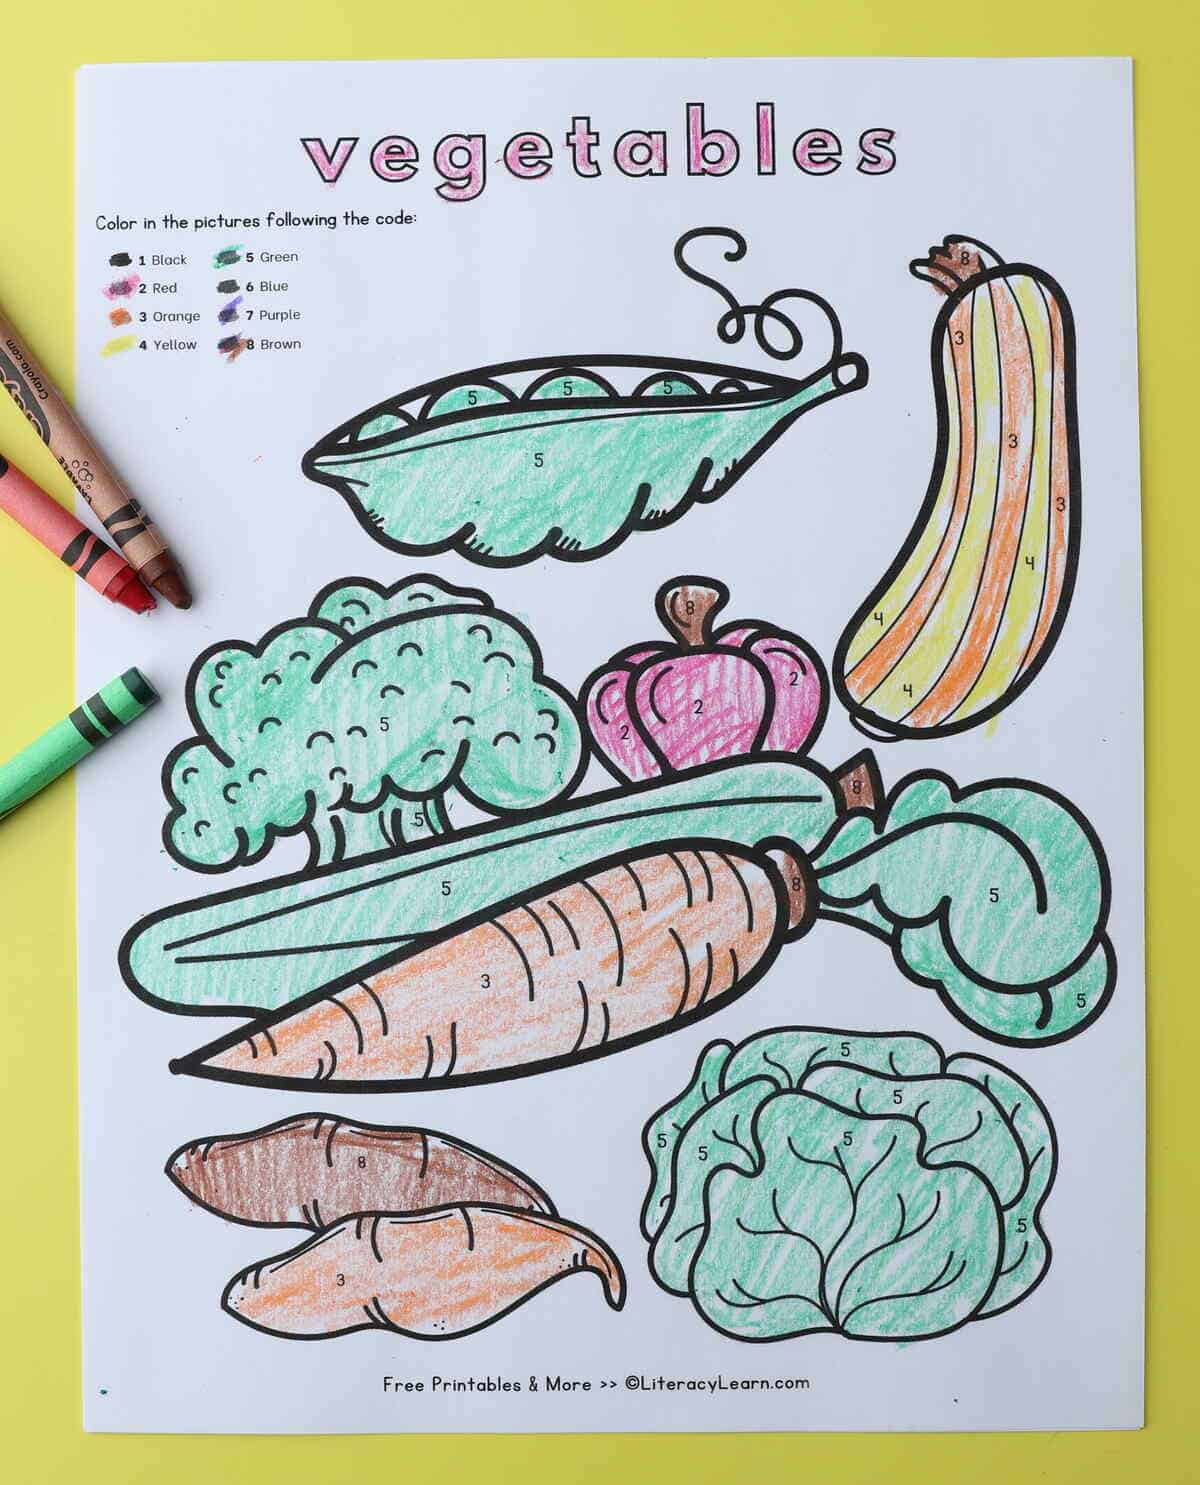 A printed vegetable category coloring page with peas, squash, broccoli, pepper, lettuce, and more. 